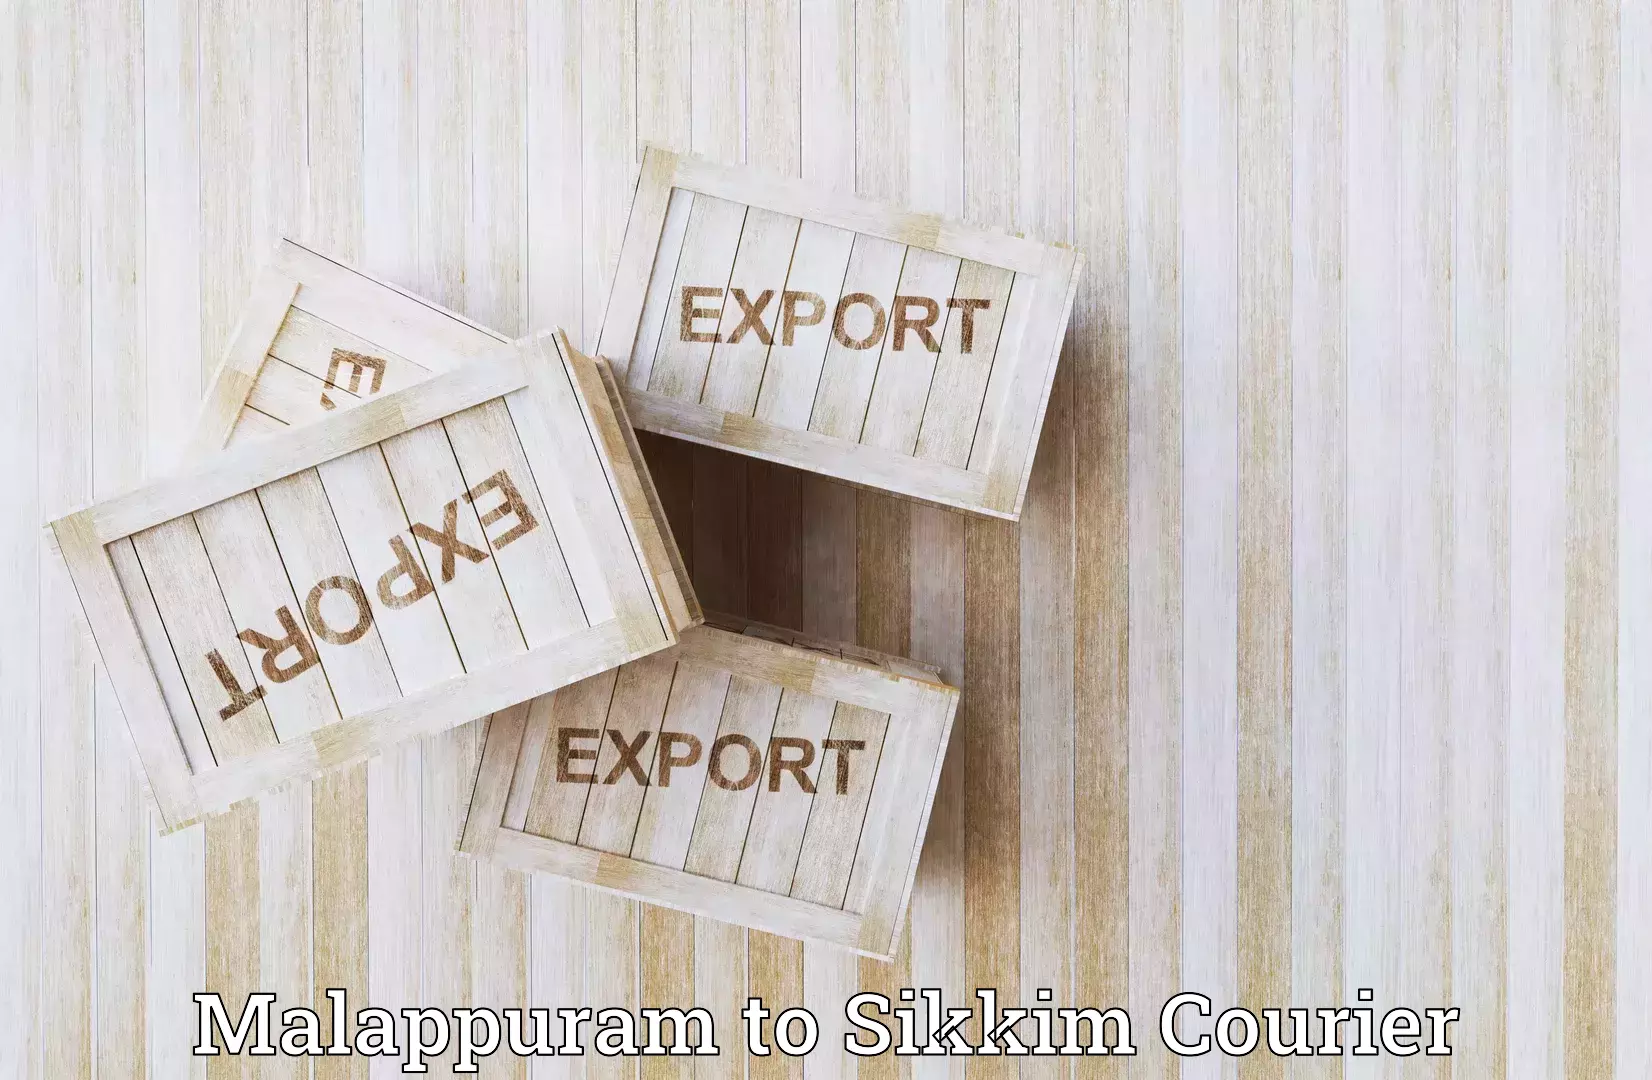 Next-day freight services in Malappuram to East Sikkim